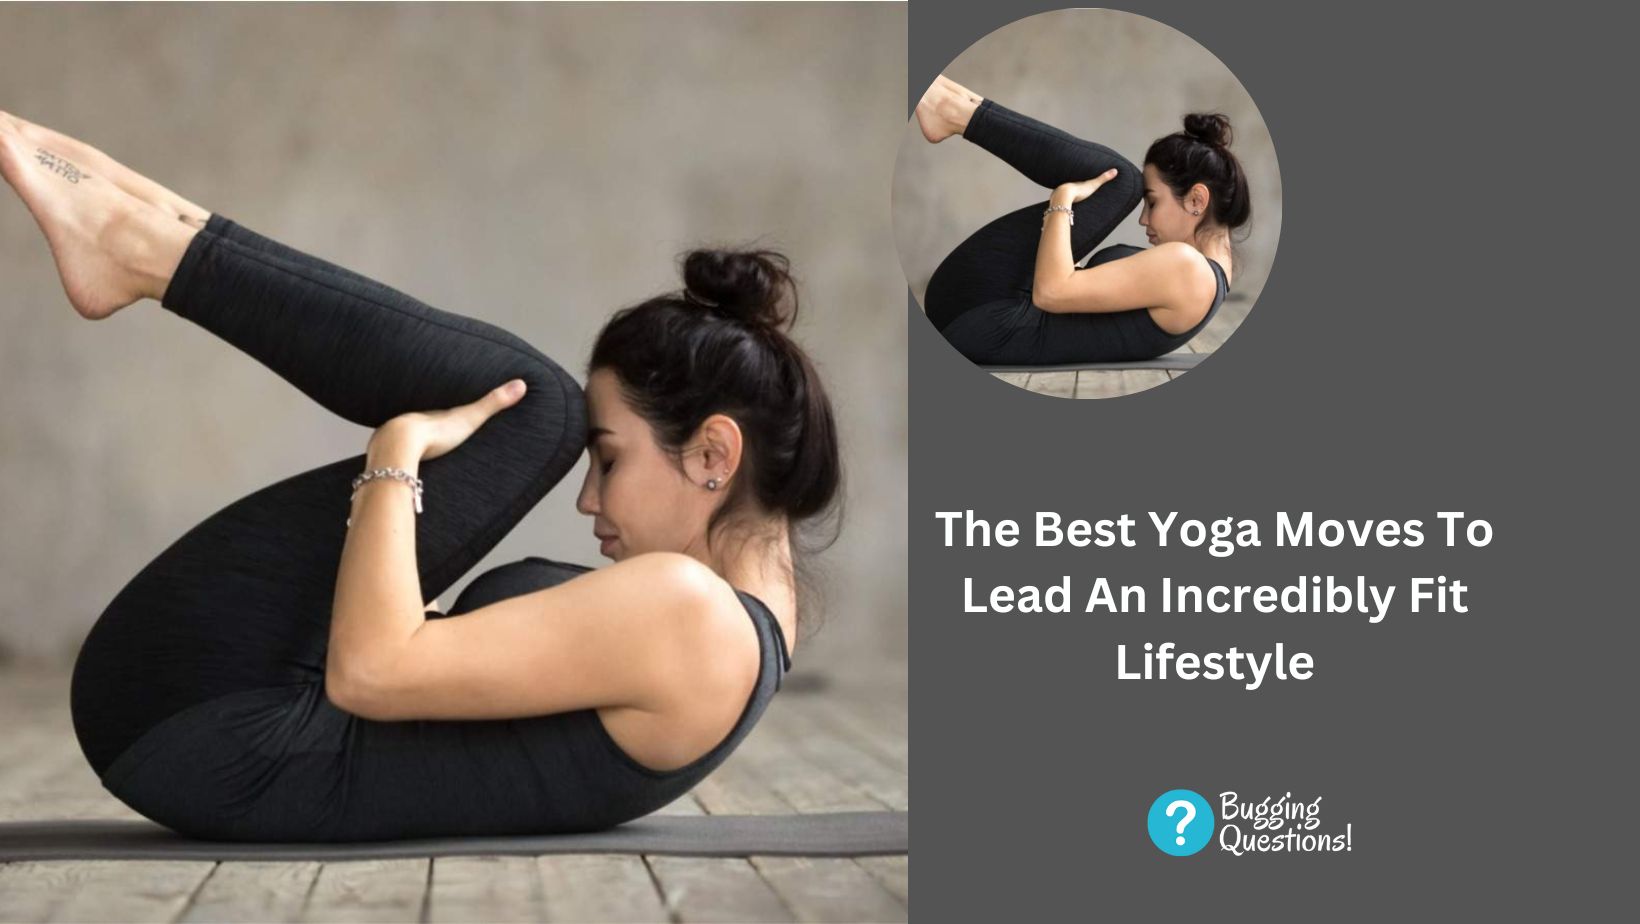 The Best Yoga Moves To Lead An Incredibly Fit Lifestyle